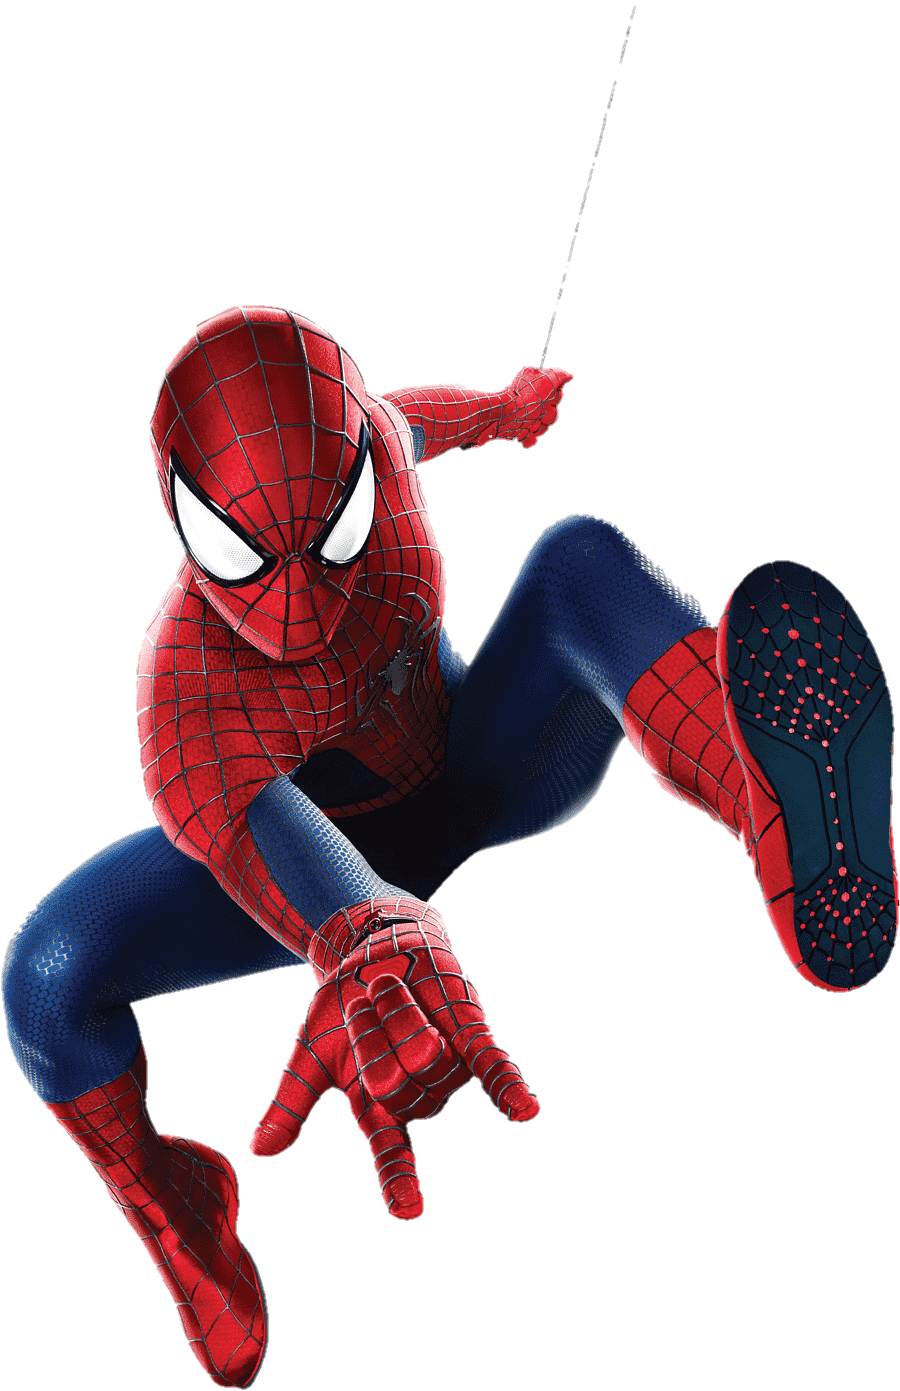 spider-man-pngfre-24